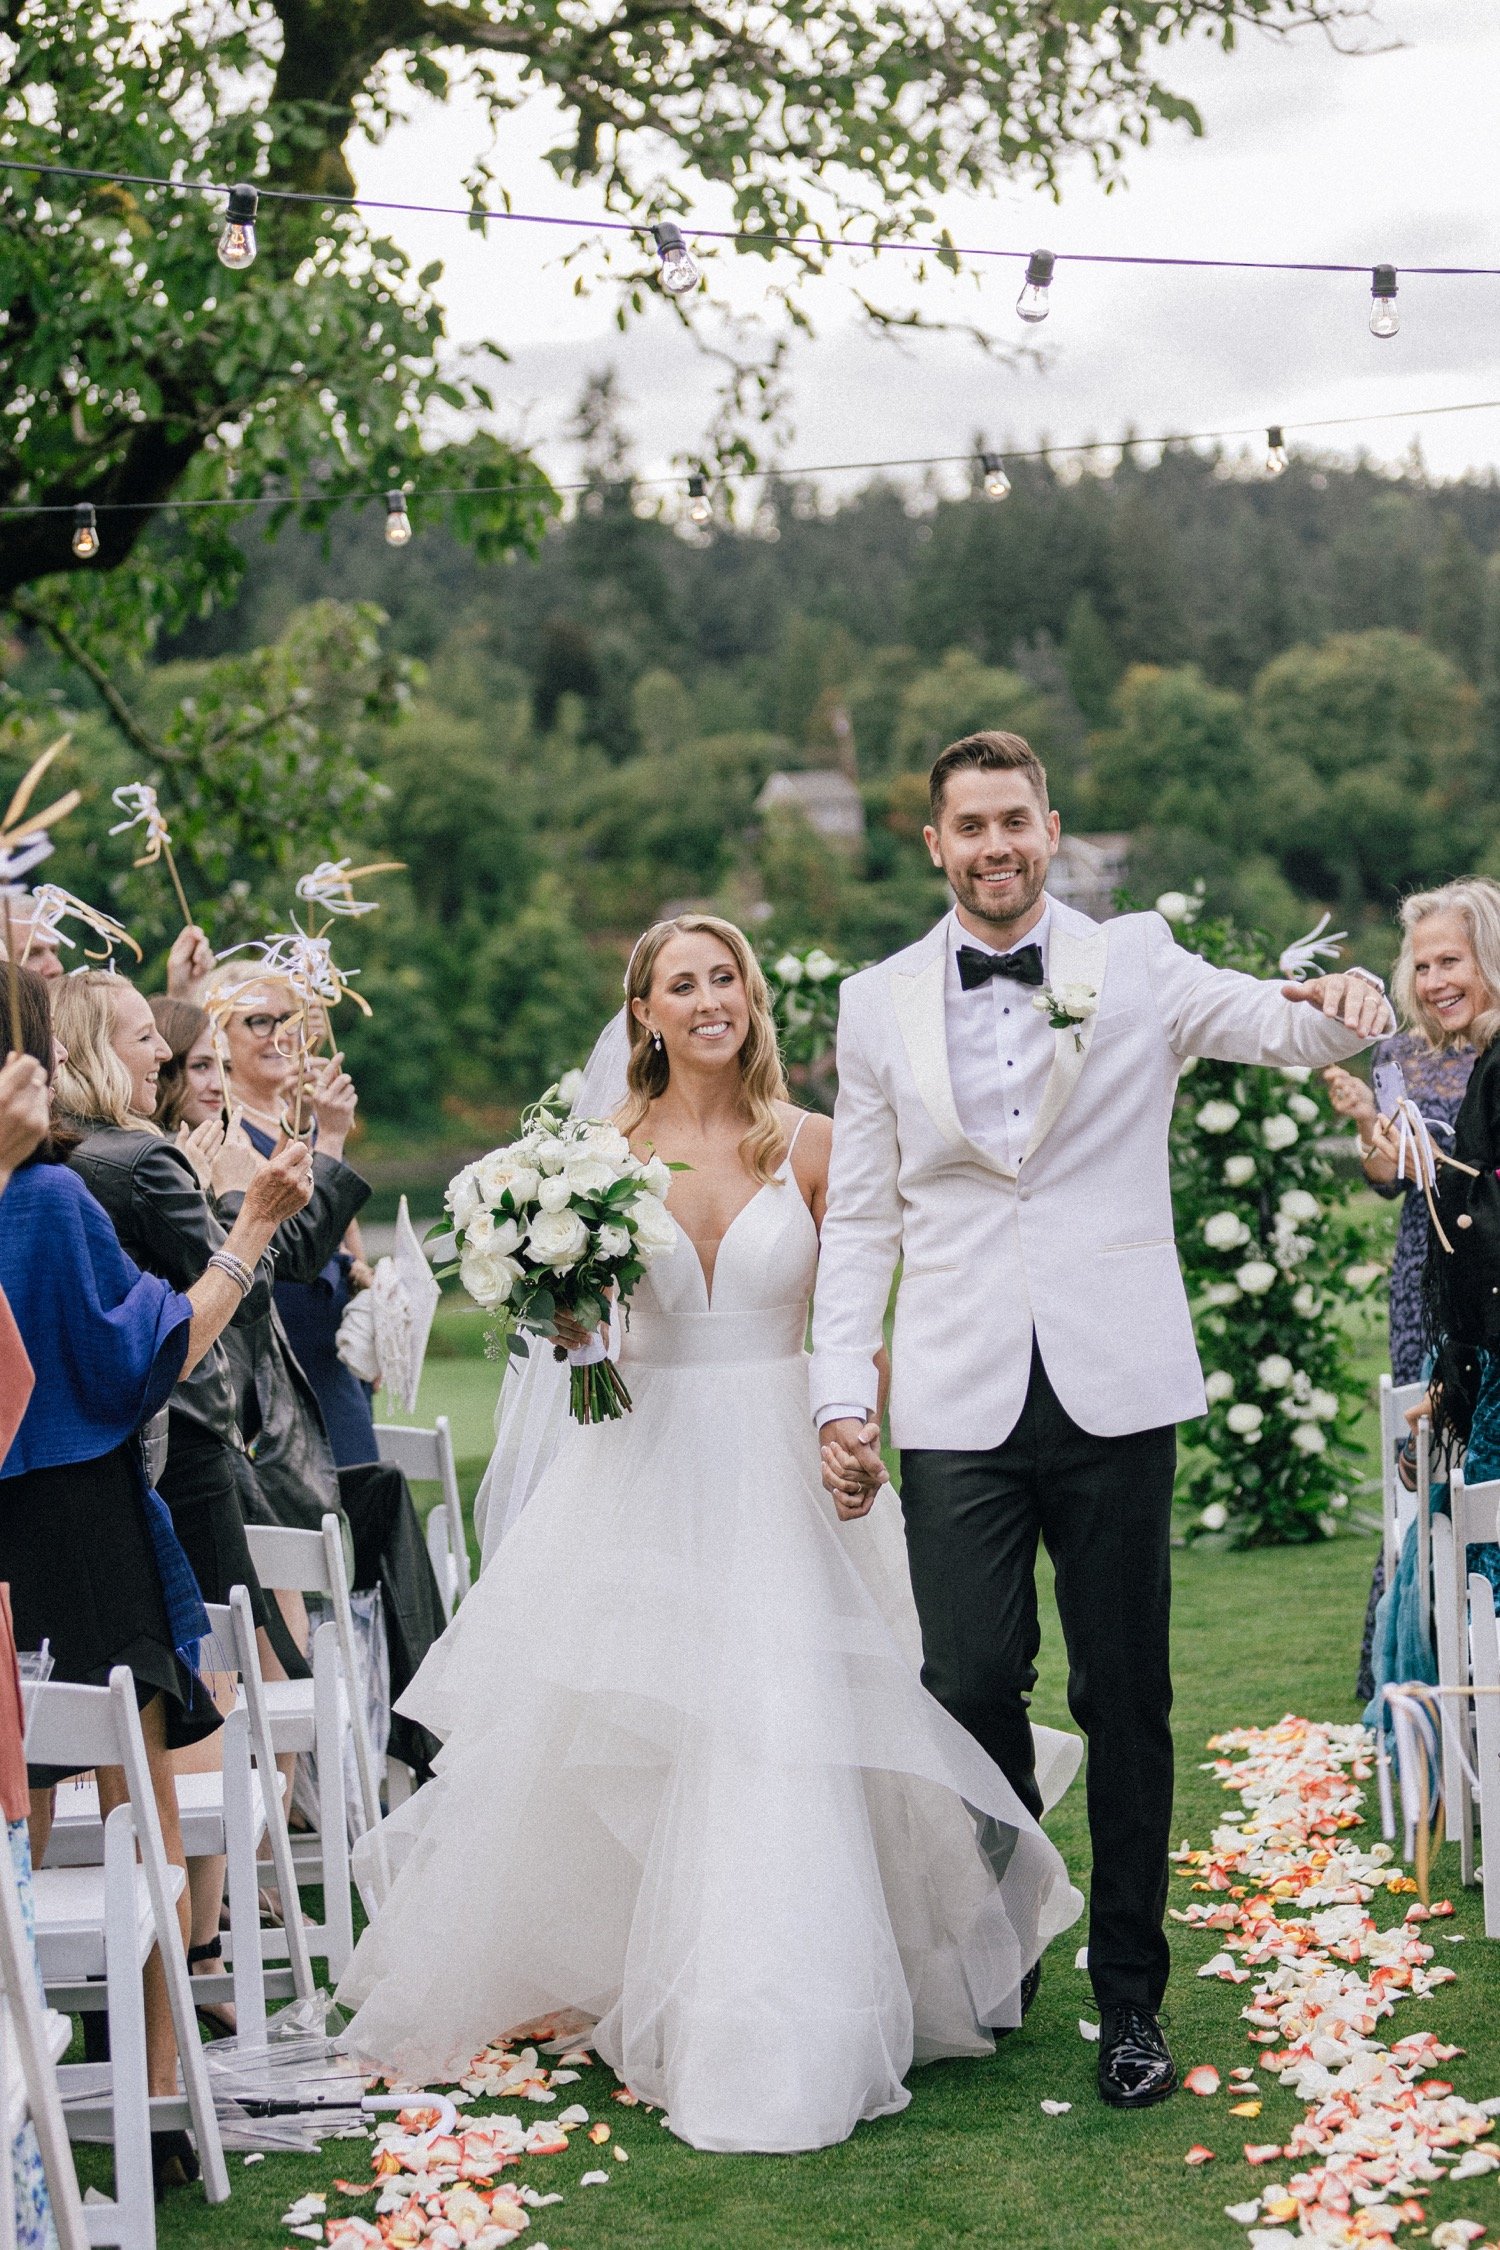  Bride in white dress and groom in white suit jacket and black pants exit wedding ceremony 